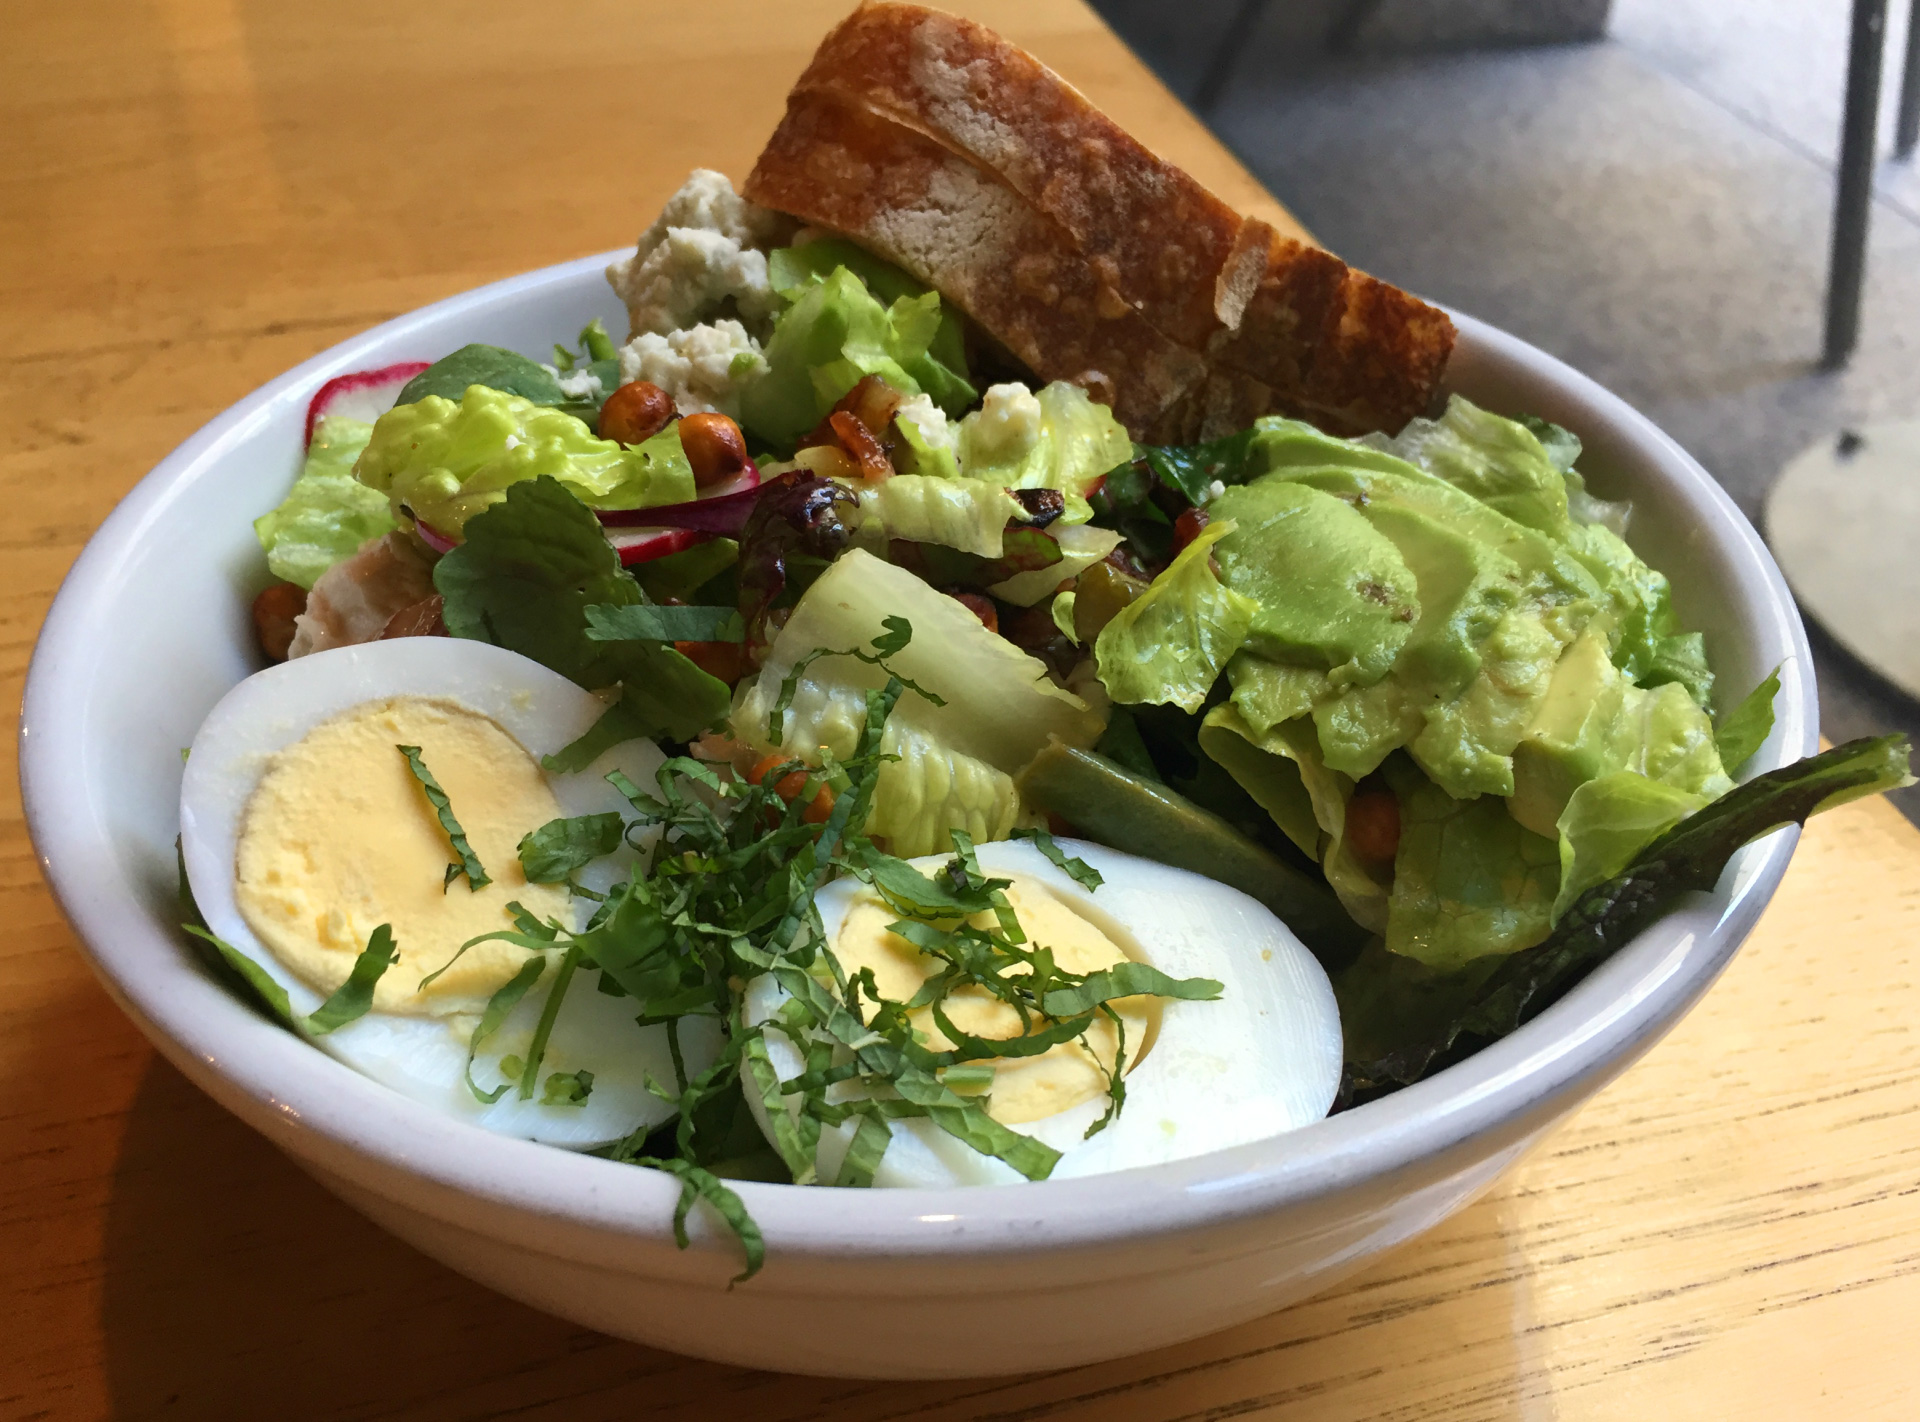 The menu at the Plant Cafe Organic changes seasonally to make room for dishes like this summer Cobb salad.